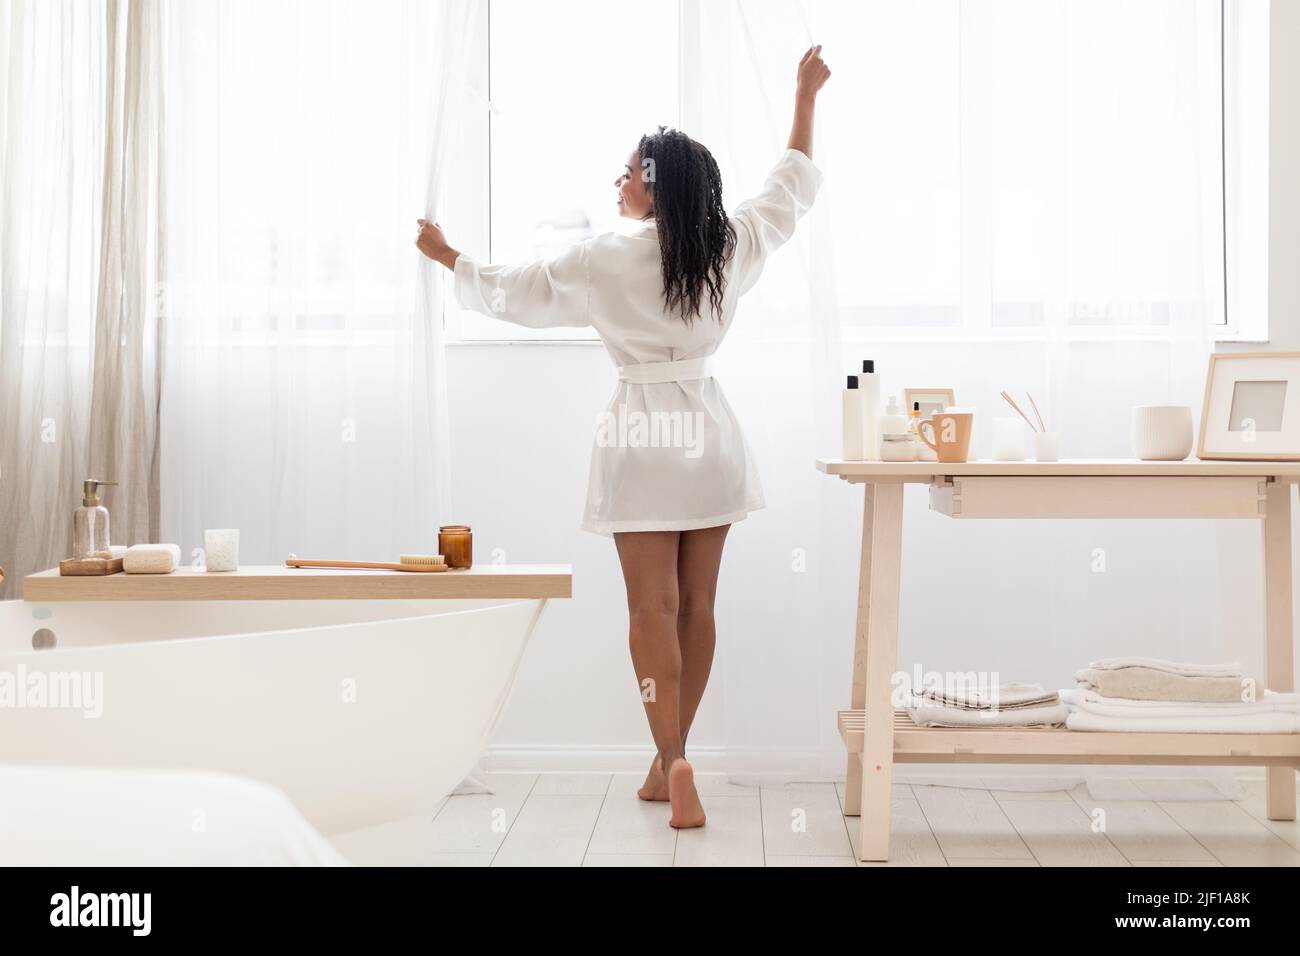 Morning Routine. Happy black woman in silk robe opening curtains in bathroom Stock Photo